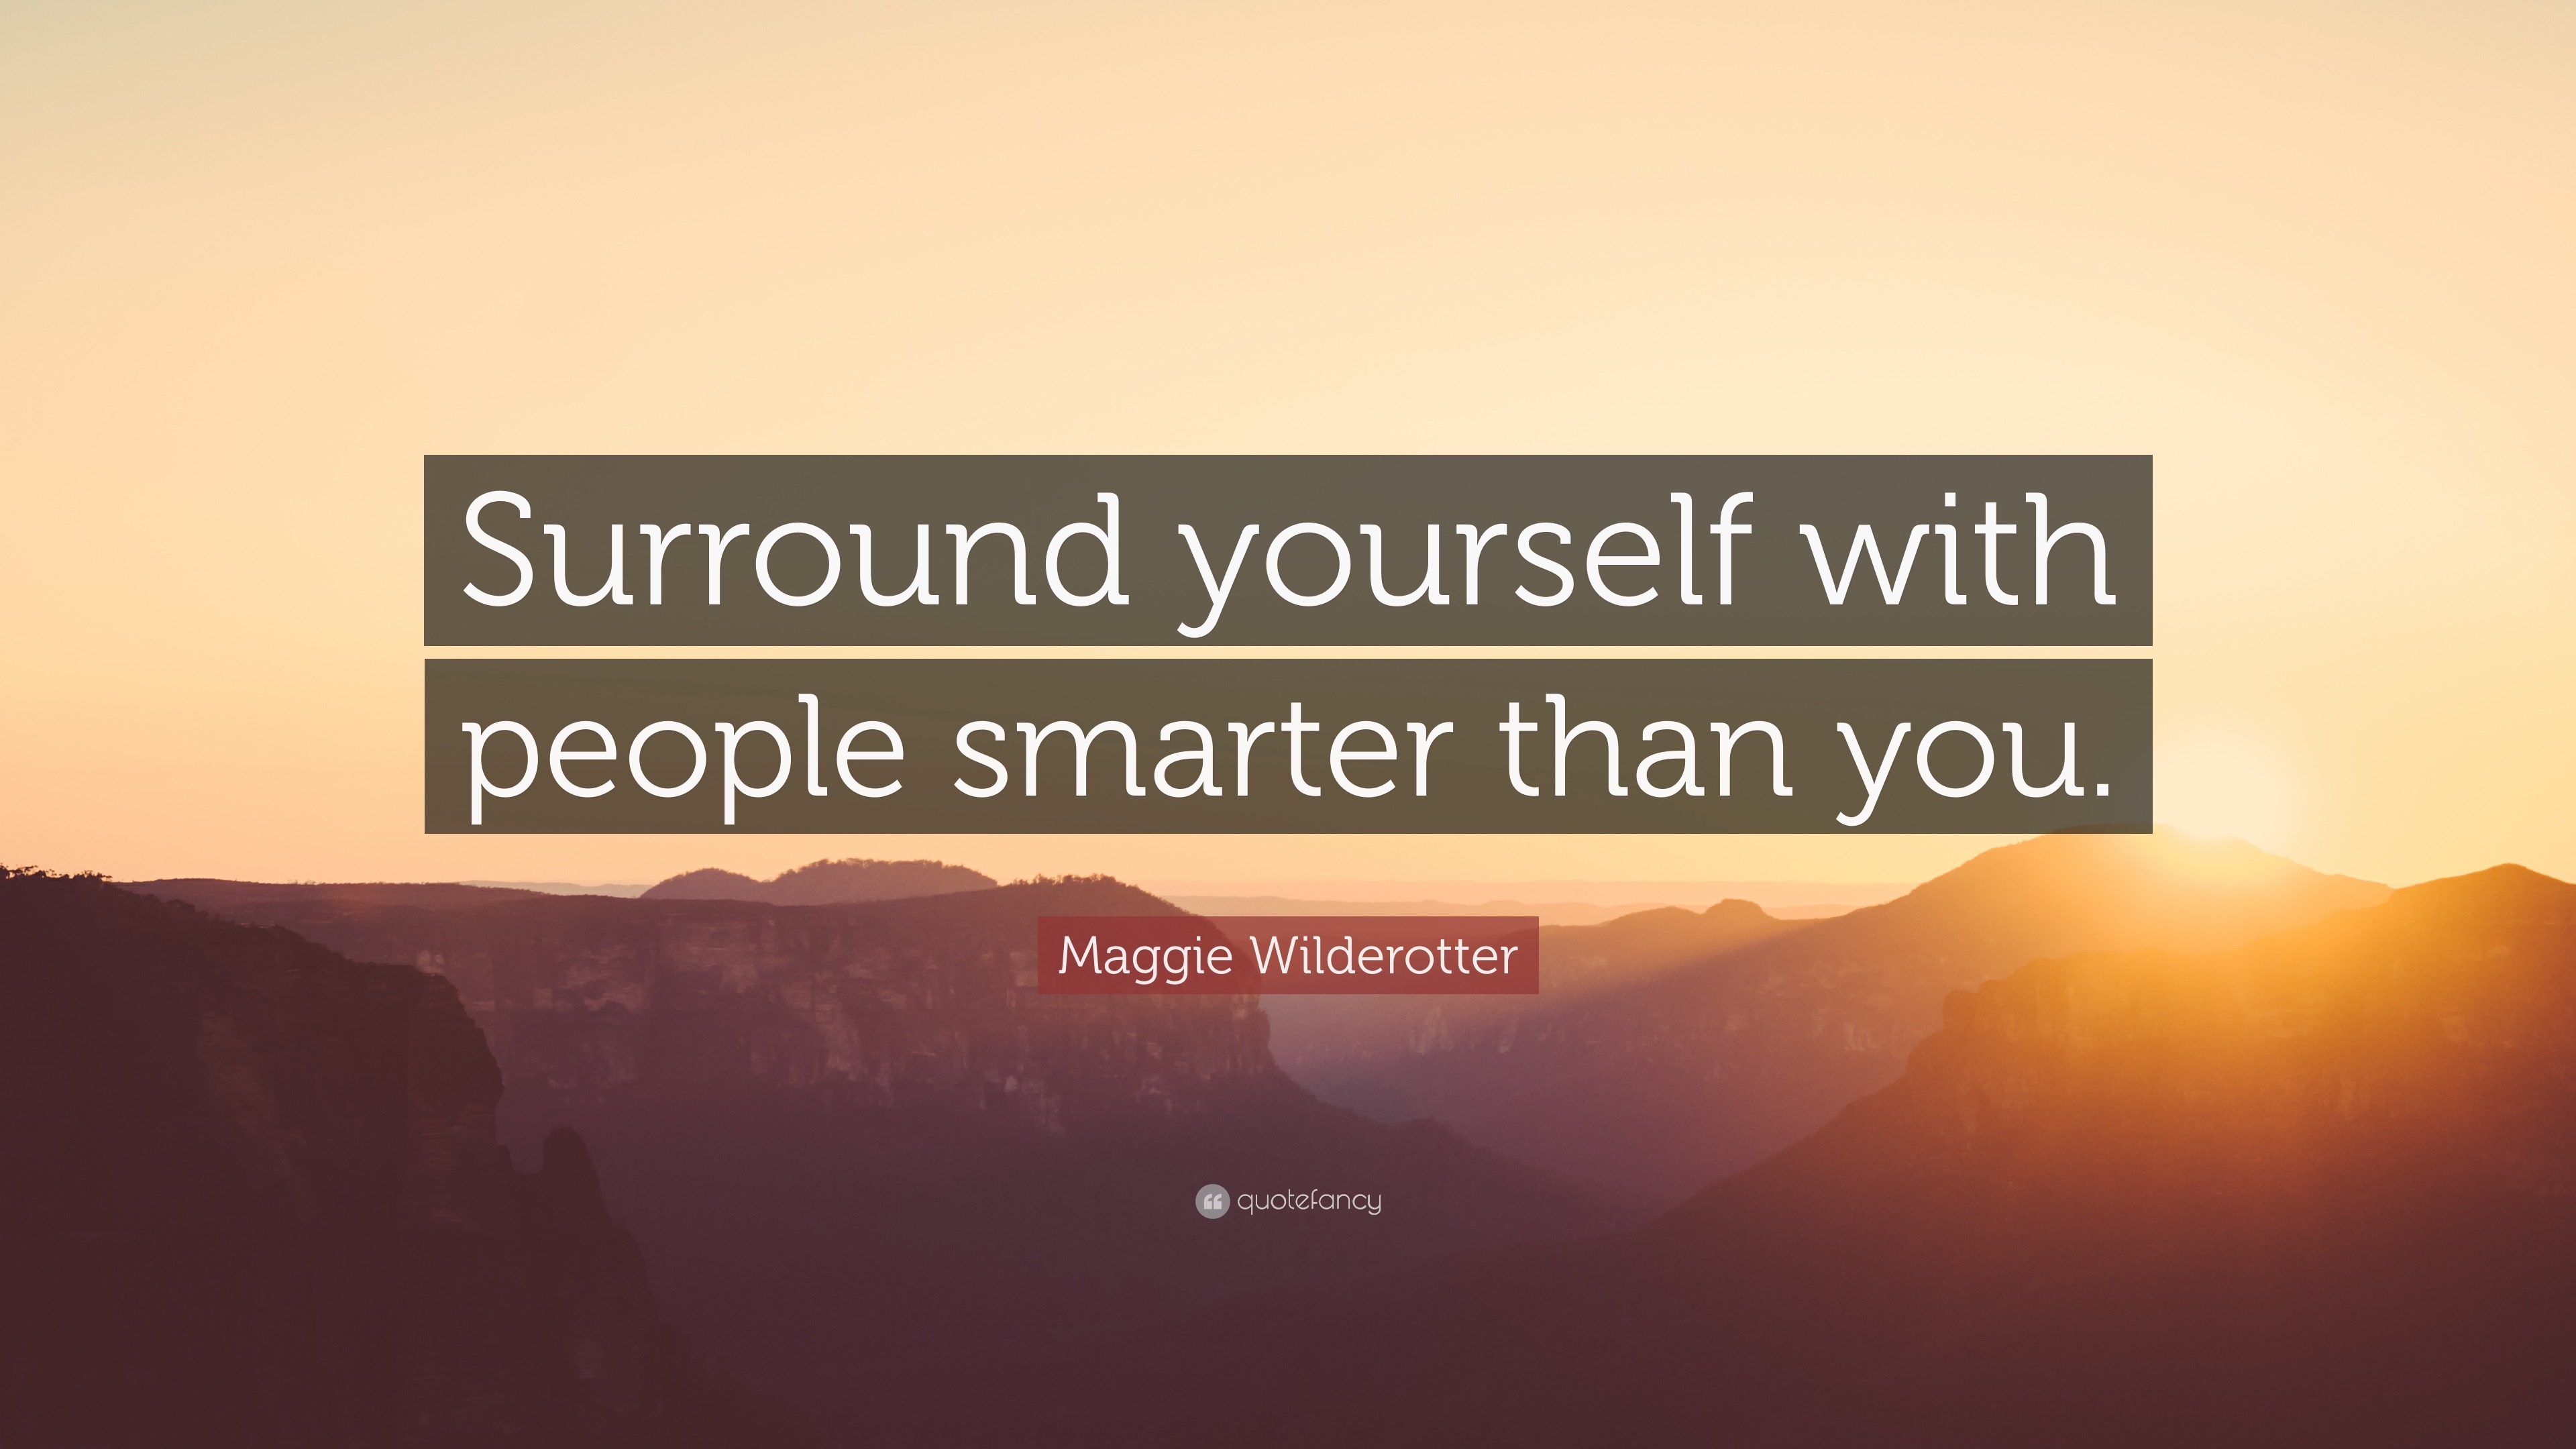 1610031 Maggie Wilderotter Quote Surround yourself with people smarter